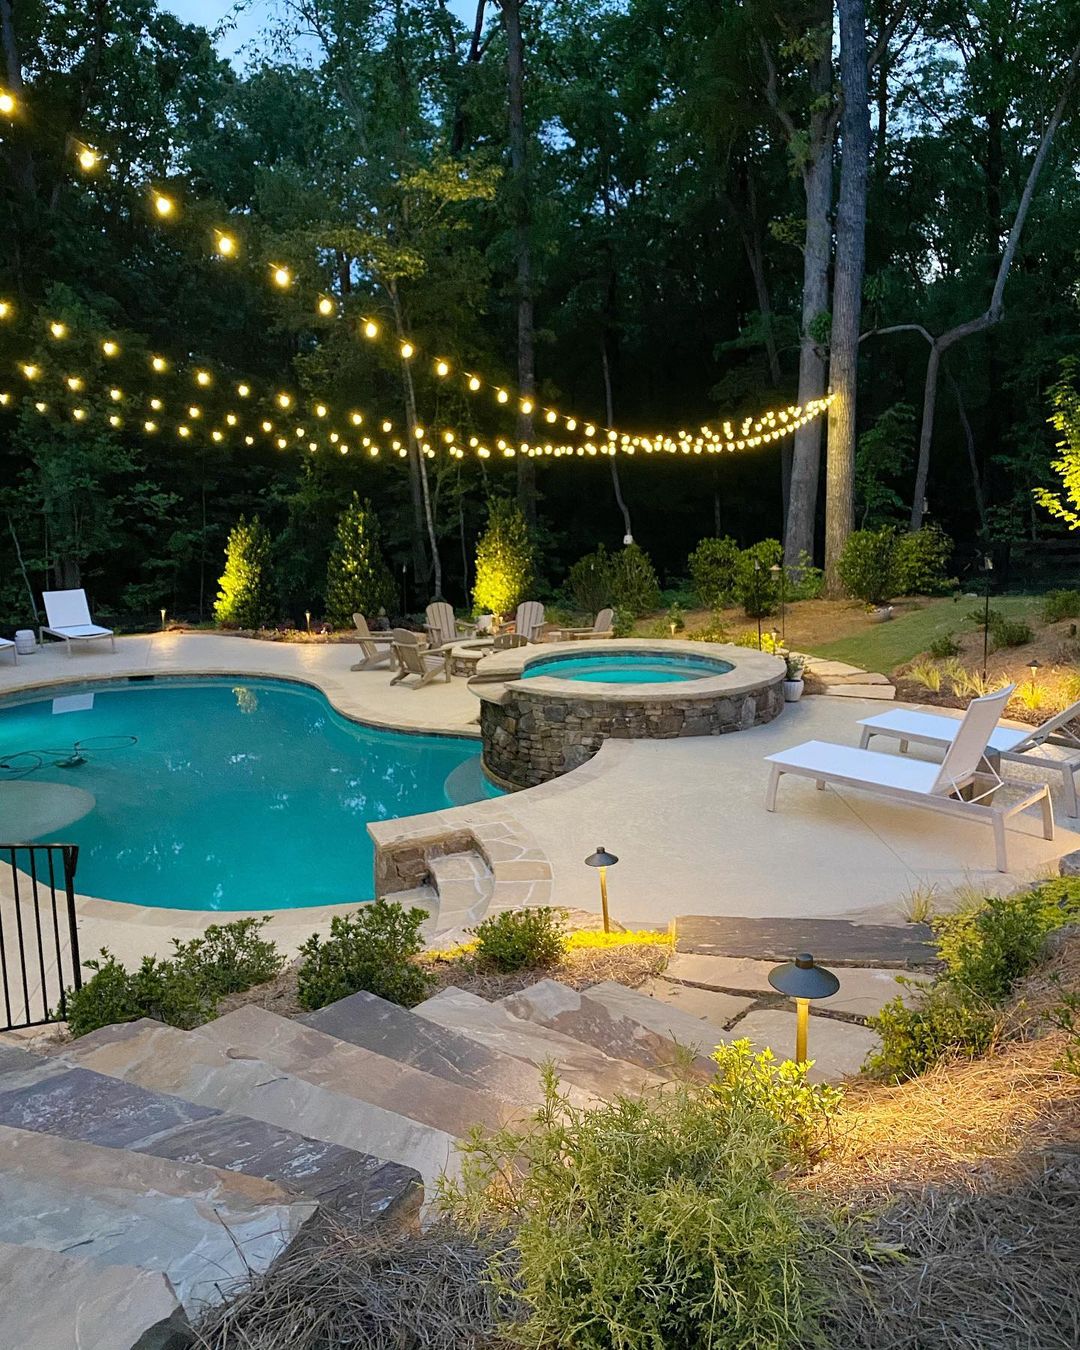 Evening photo of backyard pool with layered string lighting. Photo by Instagram user @geralyn_brennan